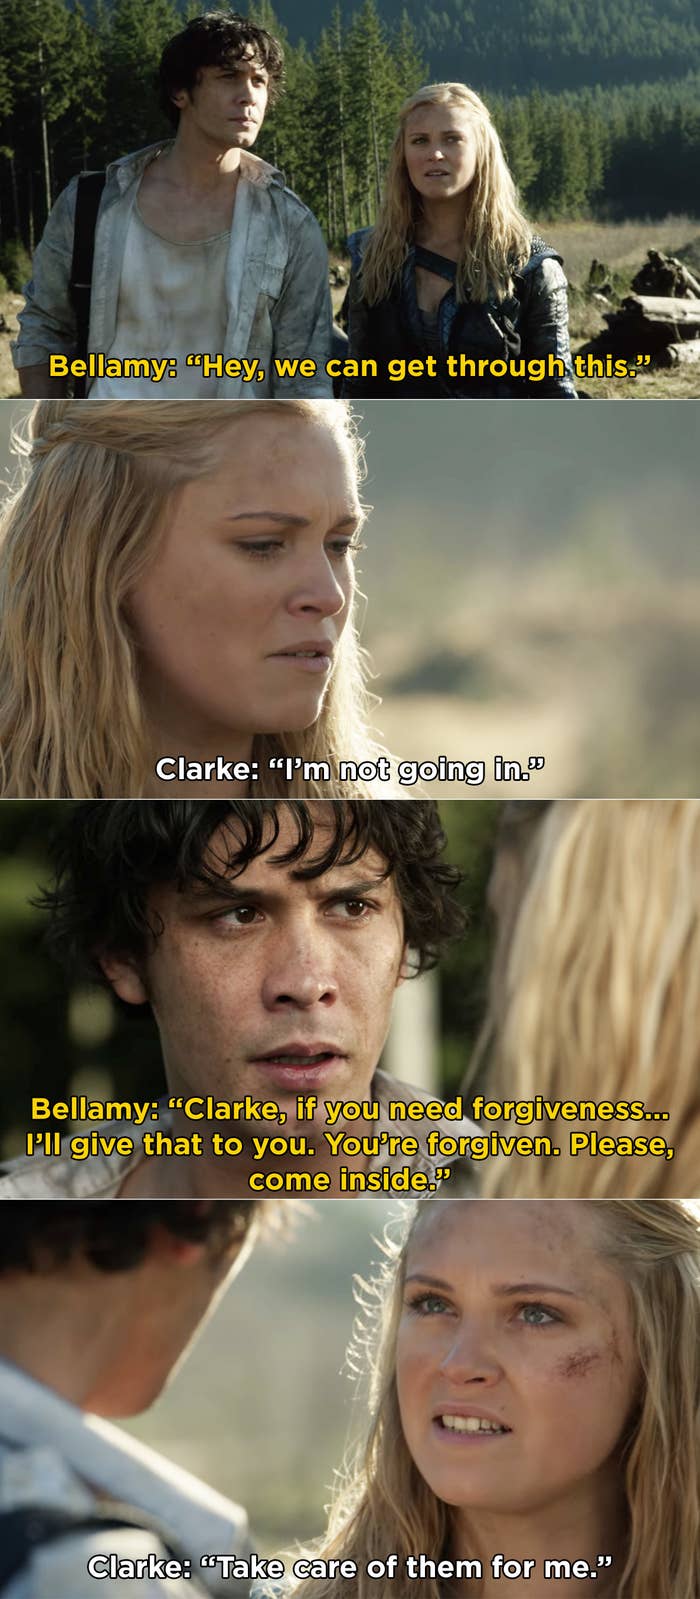 Bellamy telling Clarke that he will give her forgiveness and asking her to come inside, but Clarke refusing